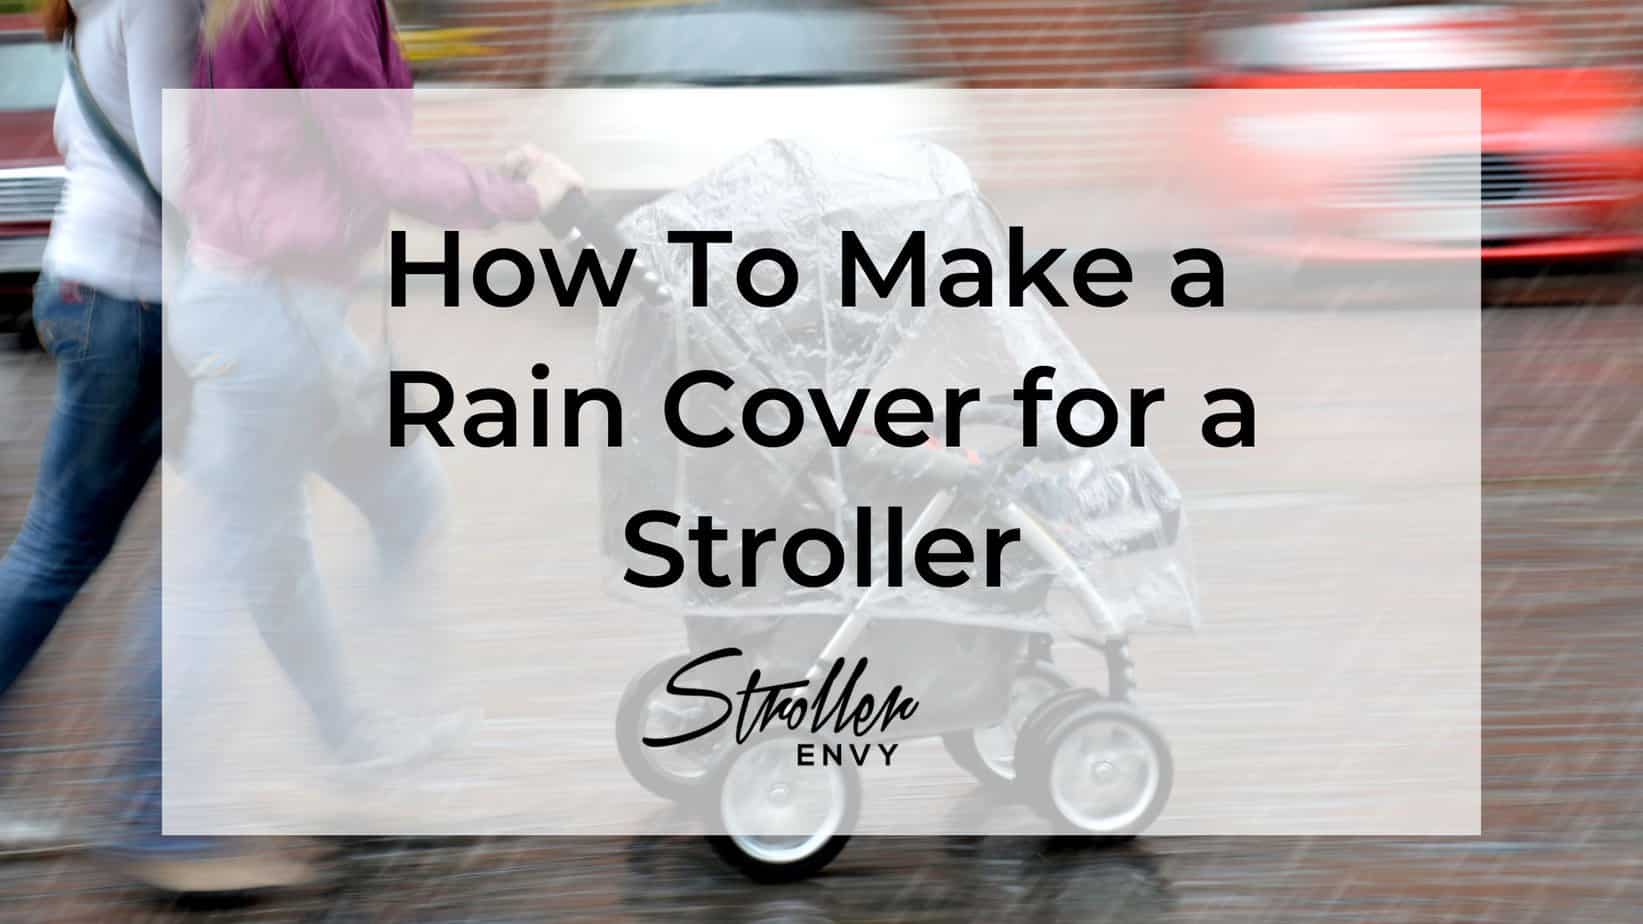 How To Make a Rain Cover for a Stroller